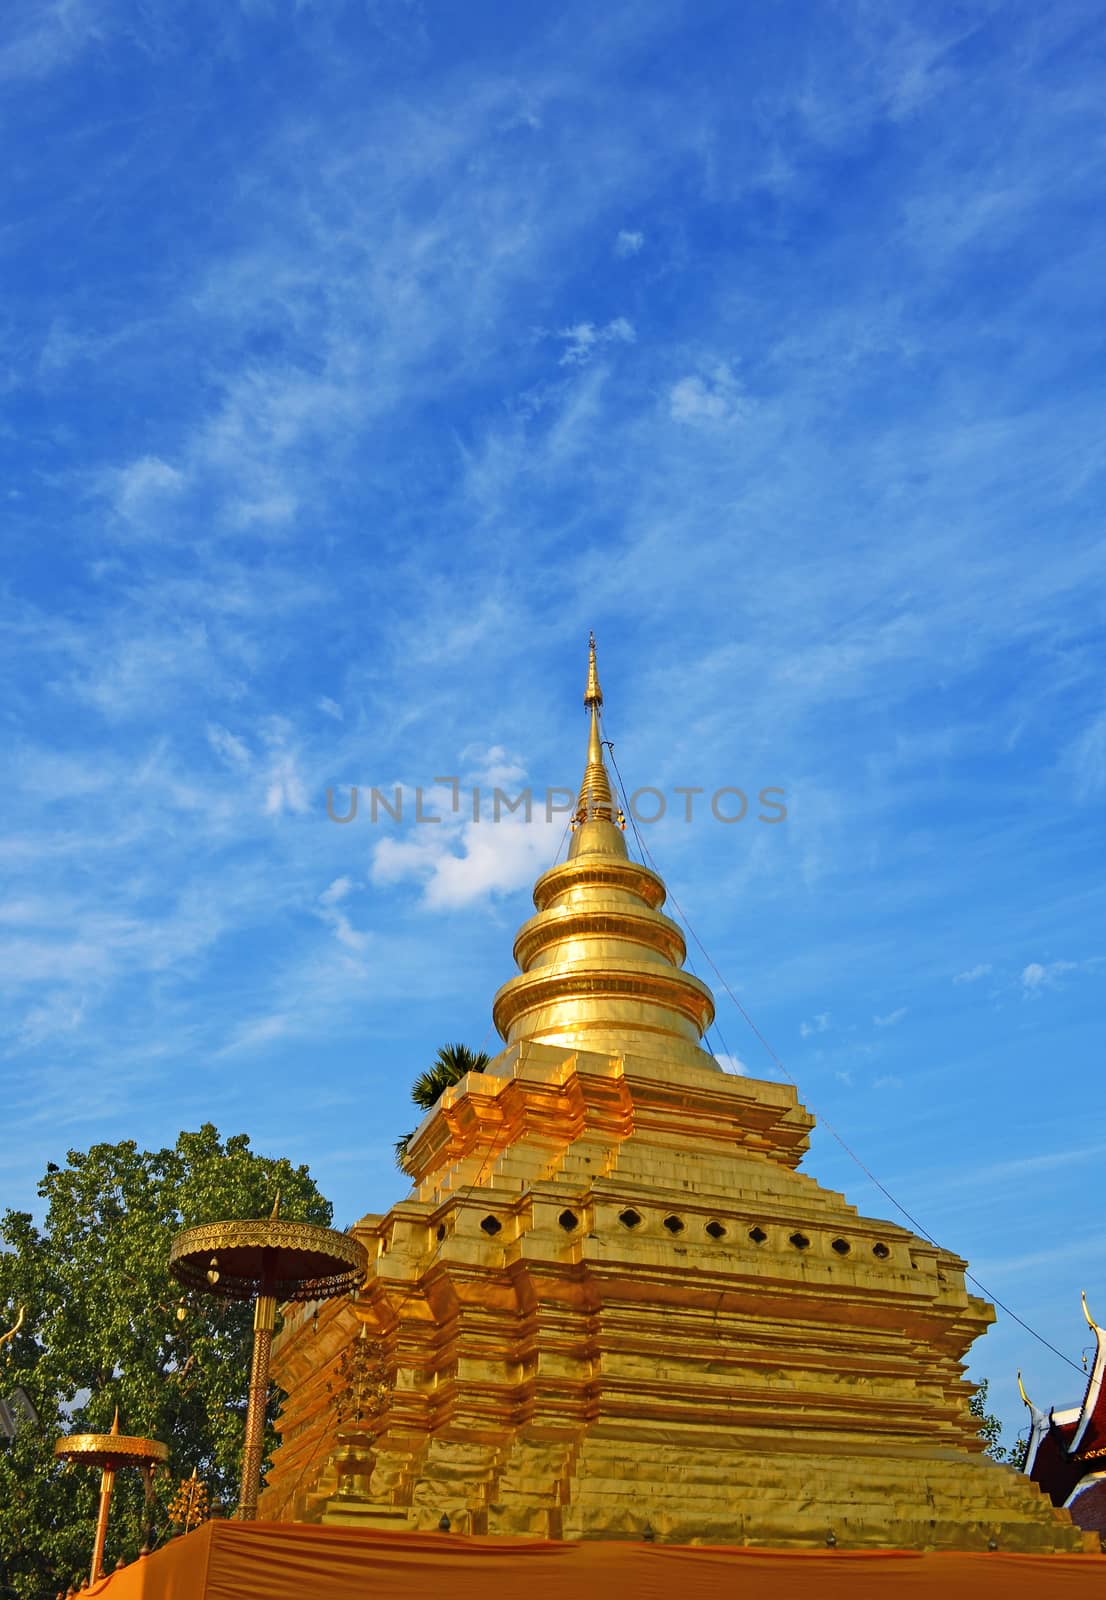 Phra That Sri Jom Thong Series 1_7, Golden Pagoda with Cloud and Blue Sky.Chiang Mai province,Thailand.